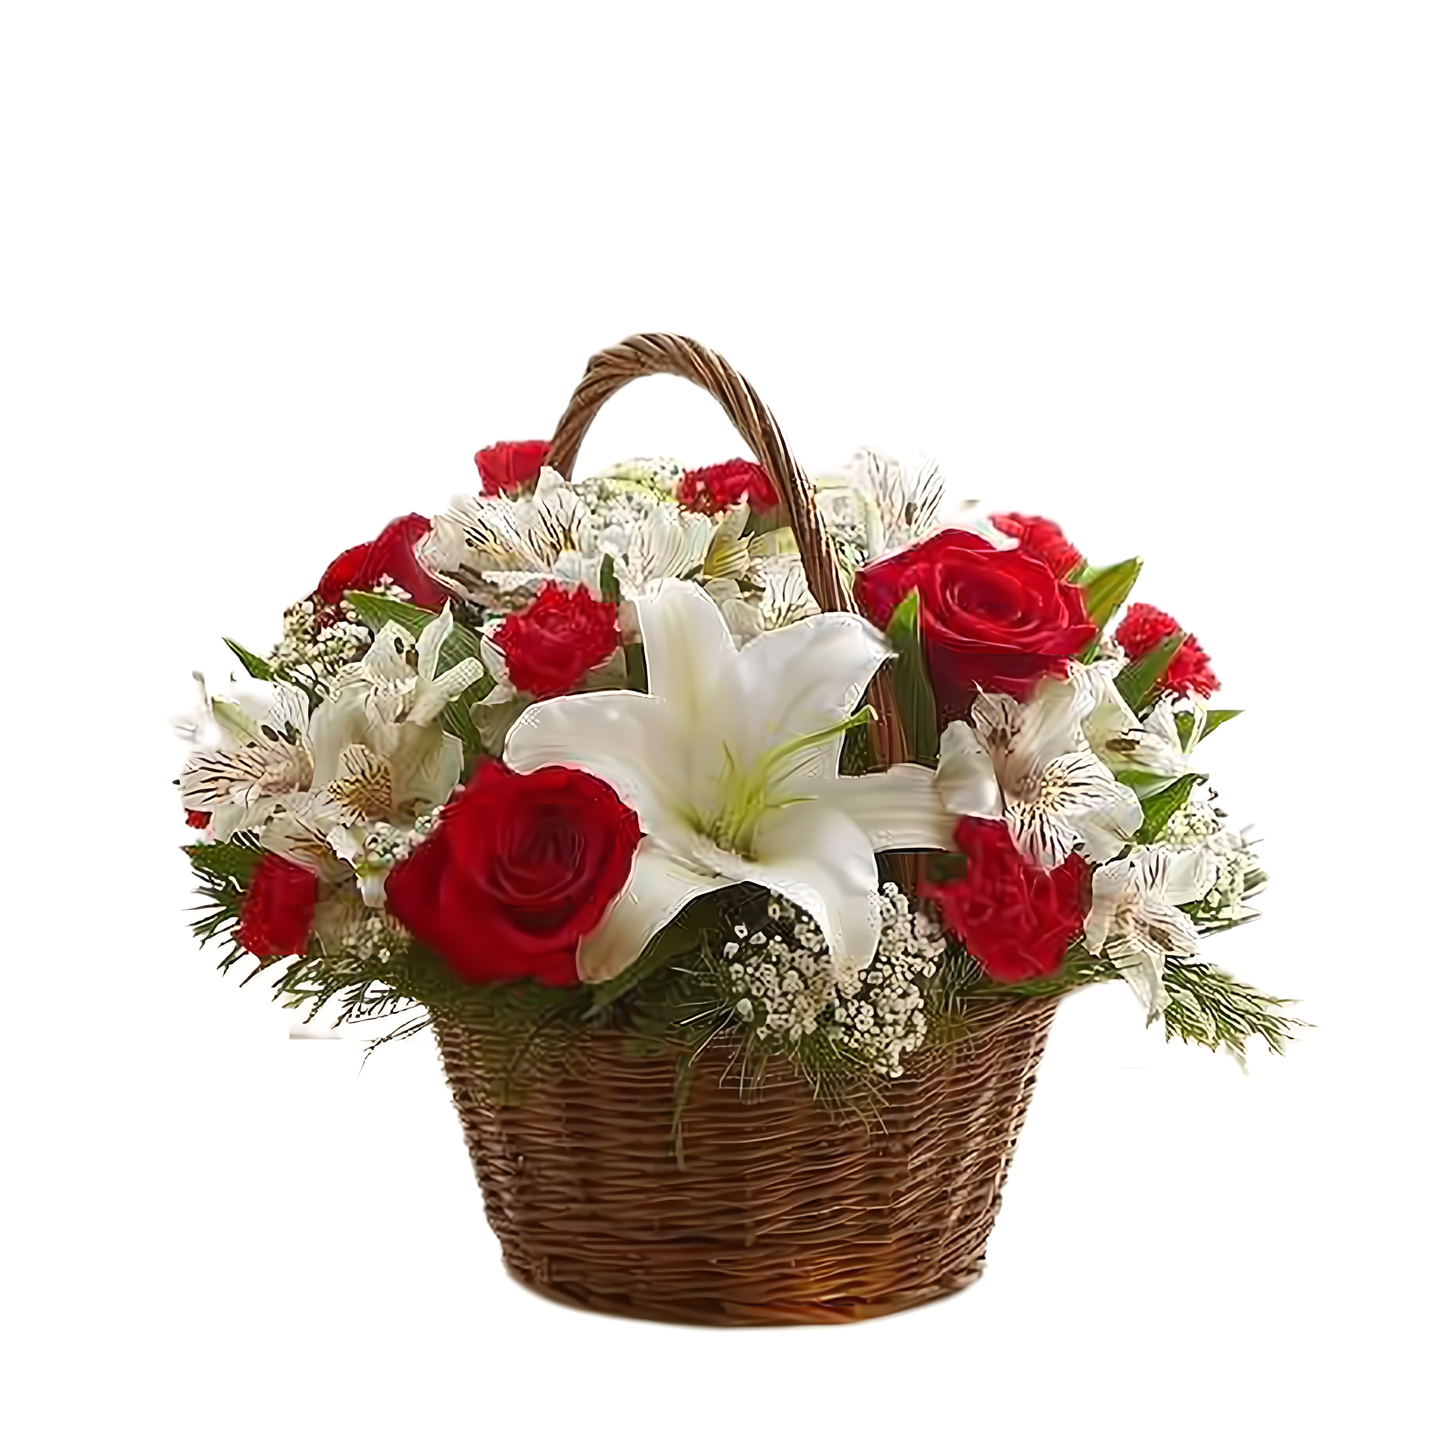 NYC Flower Delivery - Fields of the World for Winter Basket - Holiday Collection